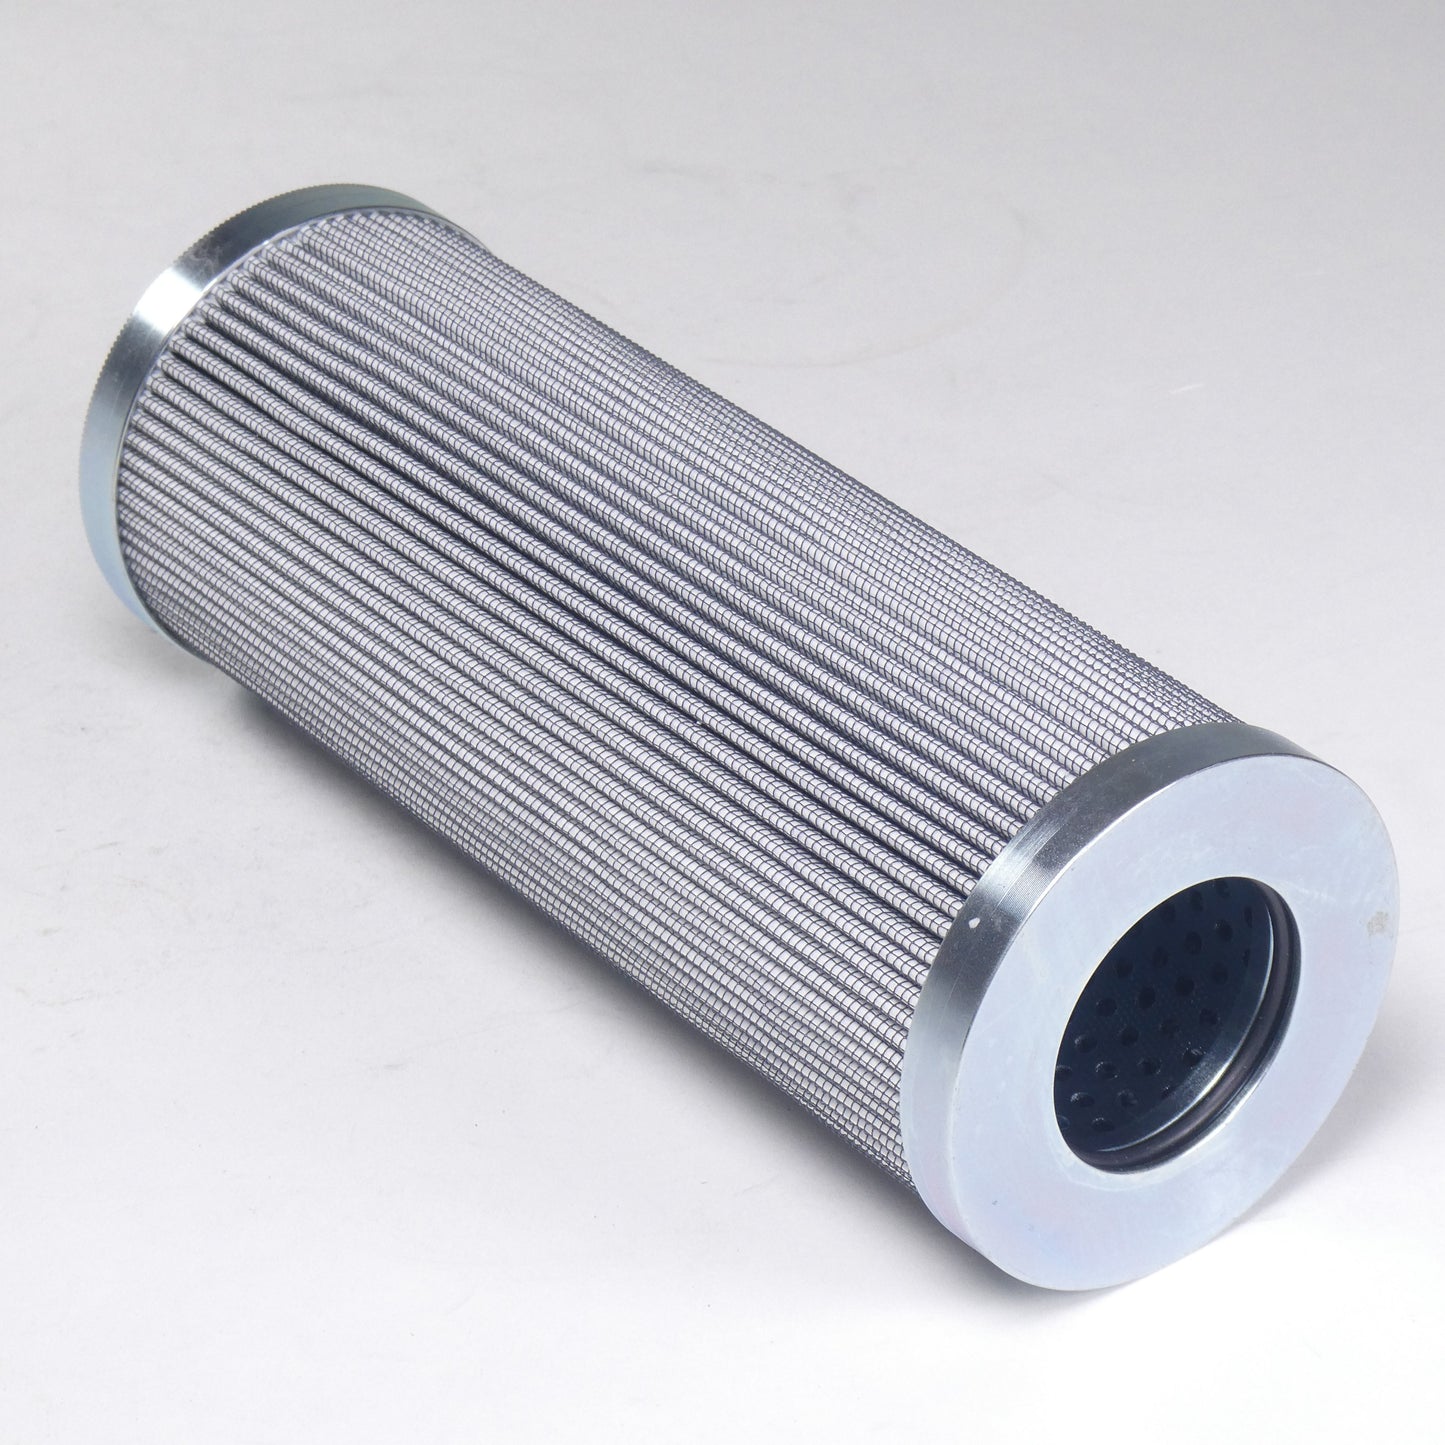 Hydrafil Replacement Filter Element for Fram FD141G25BV